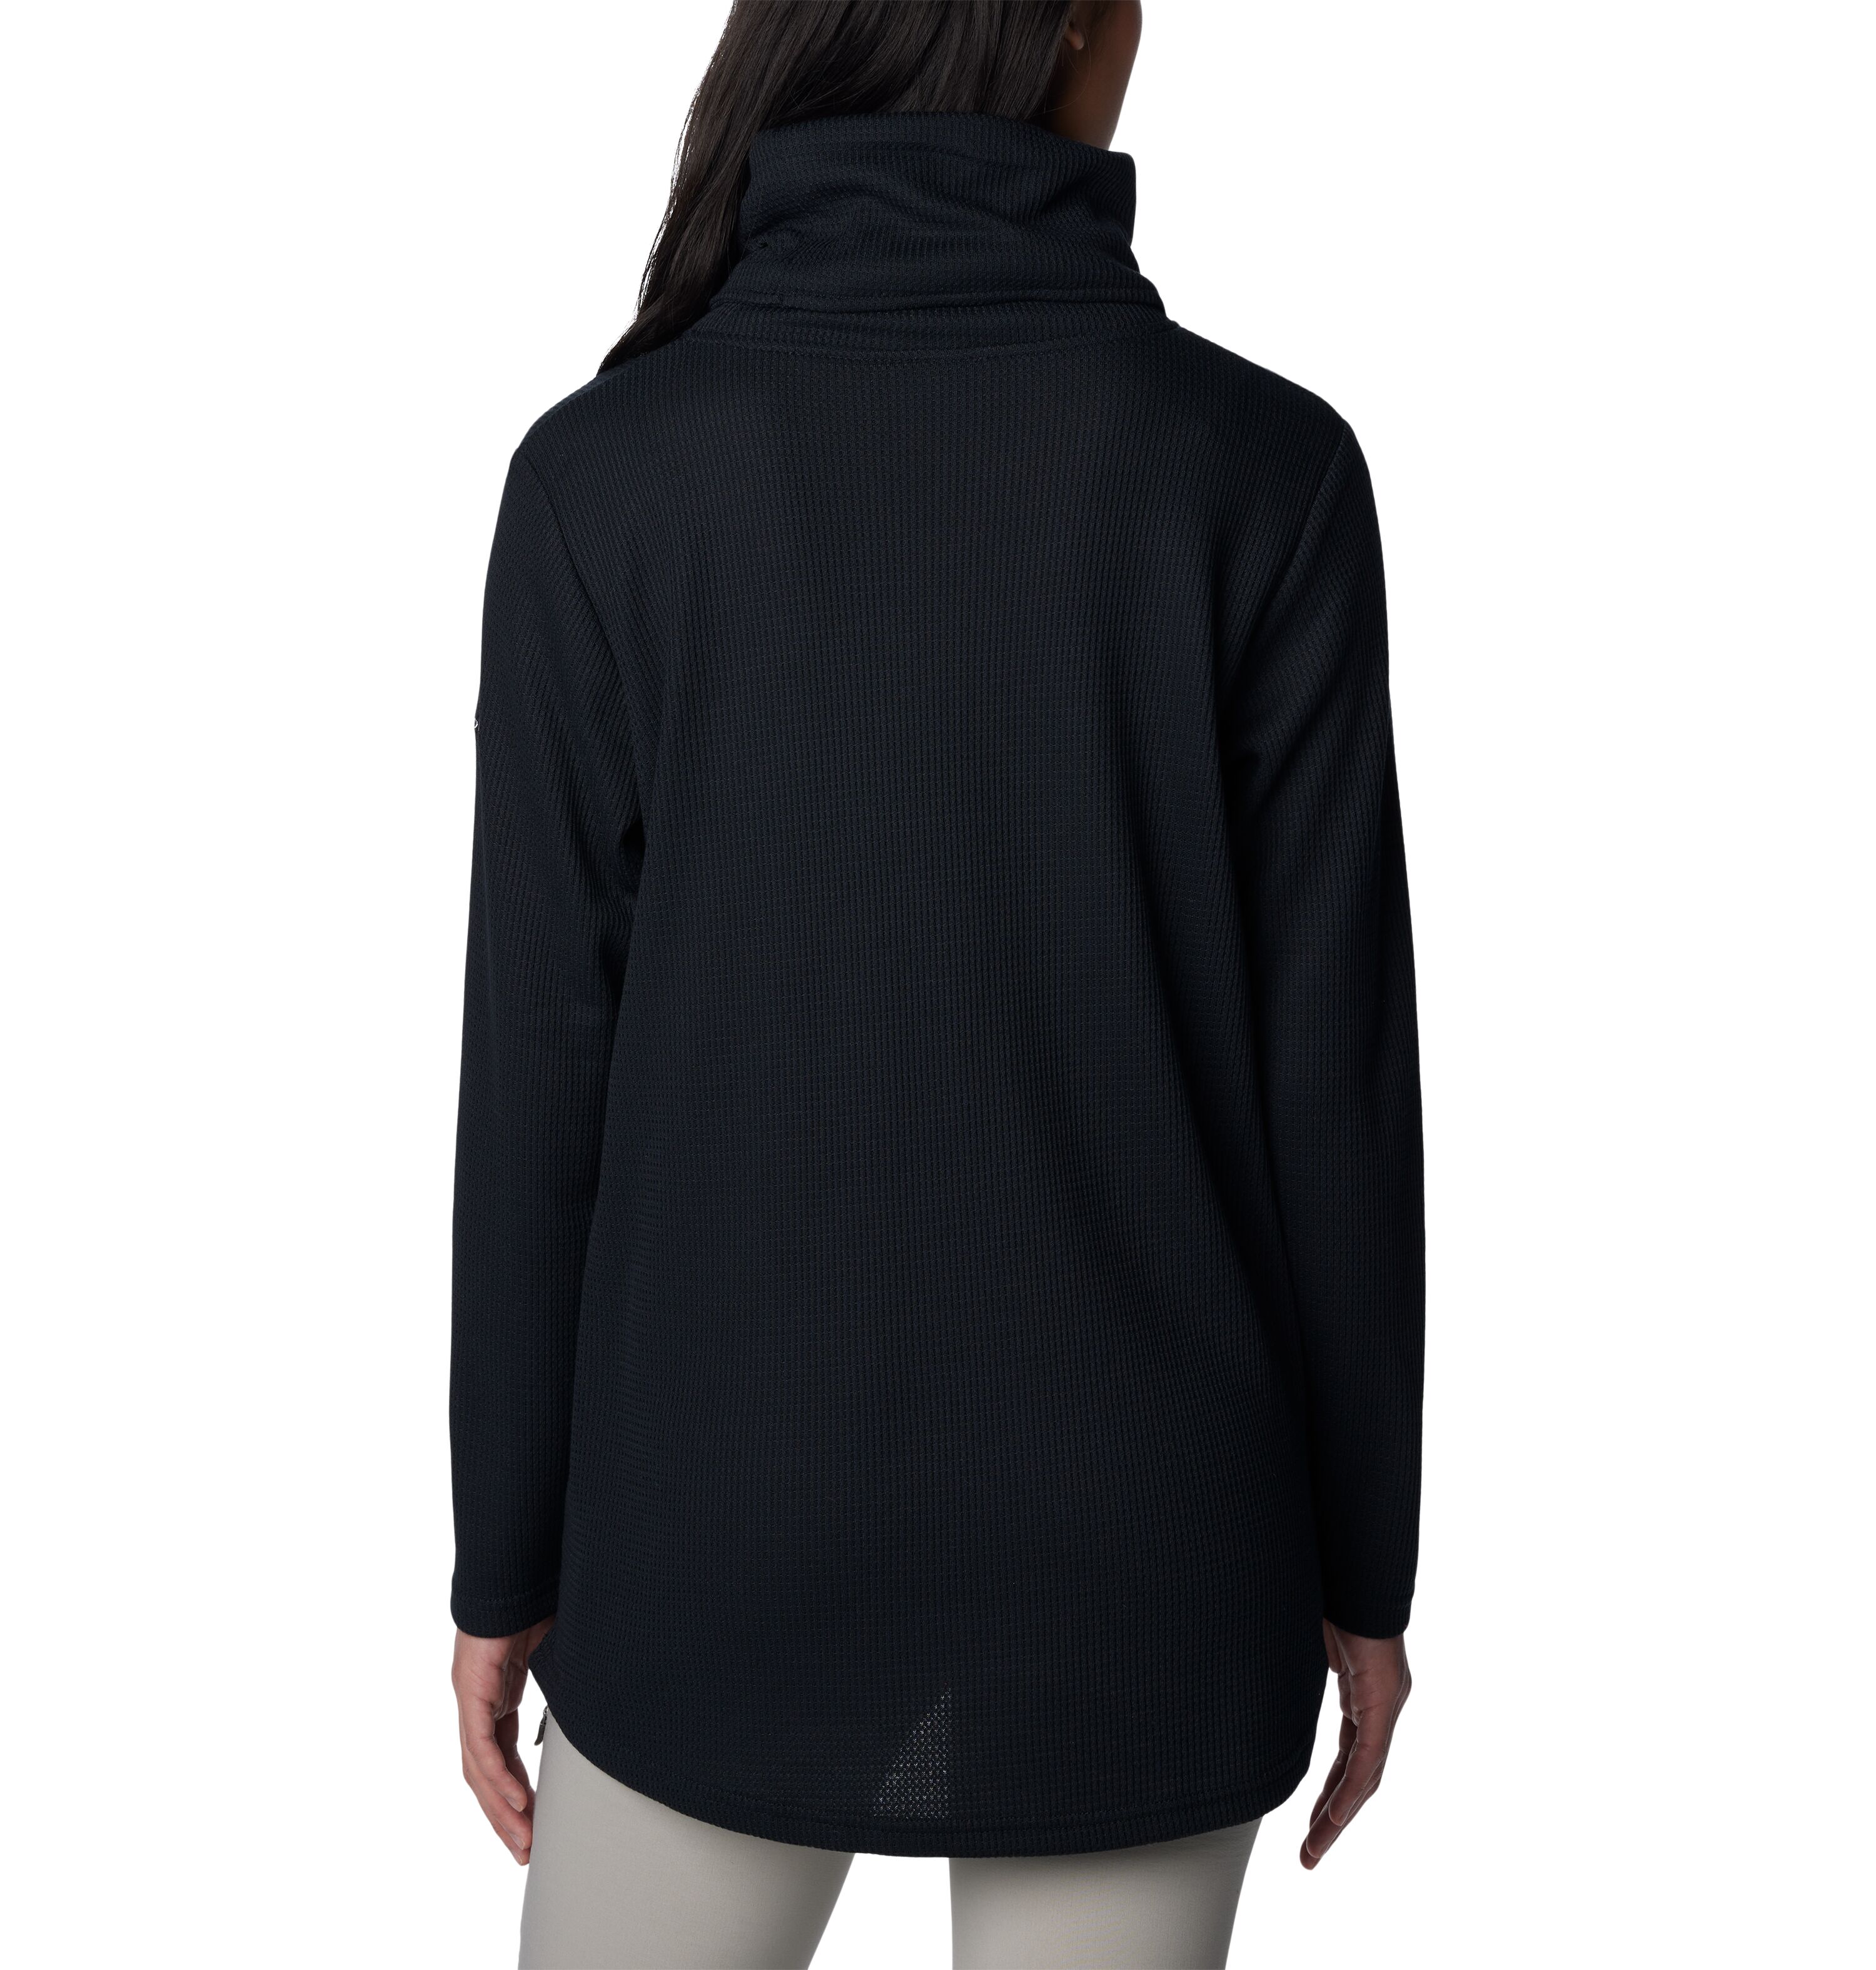 Women's Holly Hideaway Waffle Cowl Neck Pullover in Black